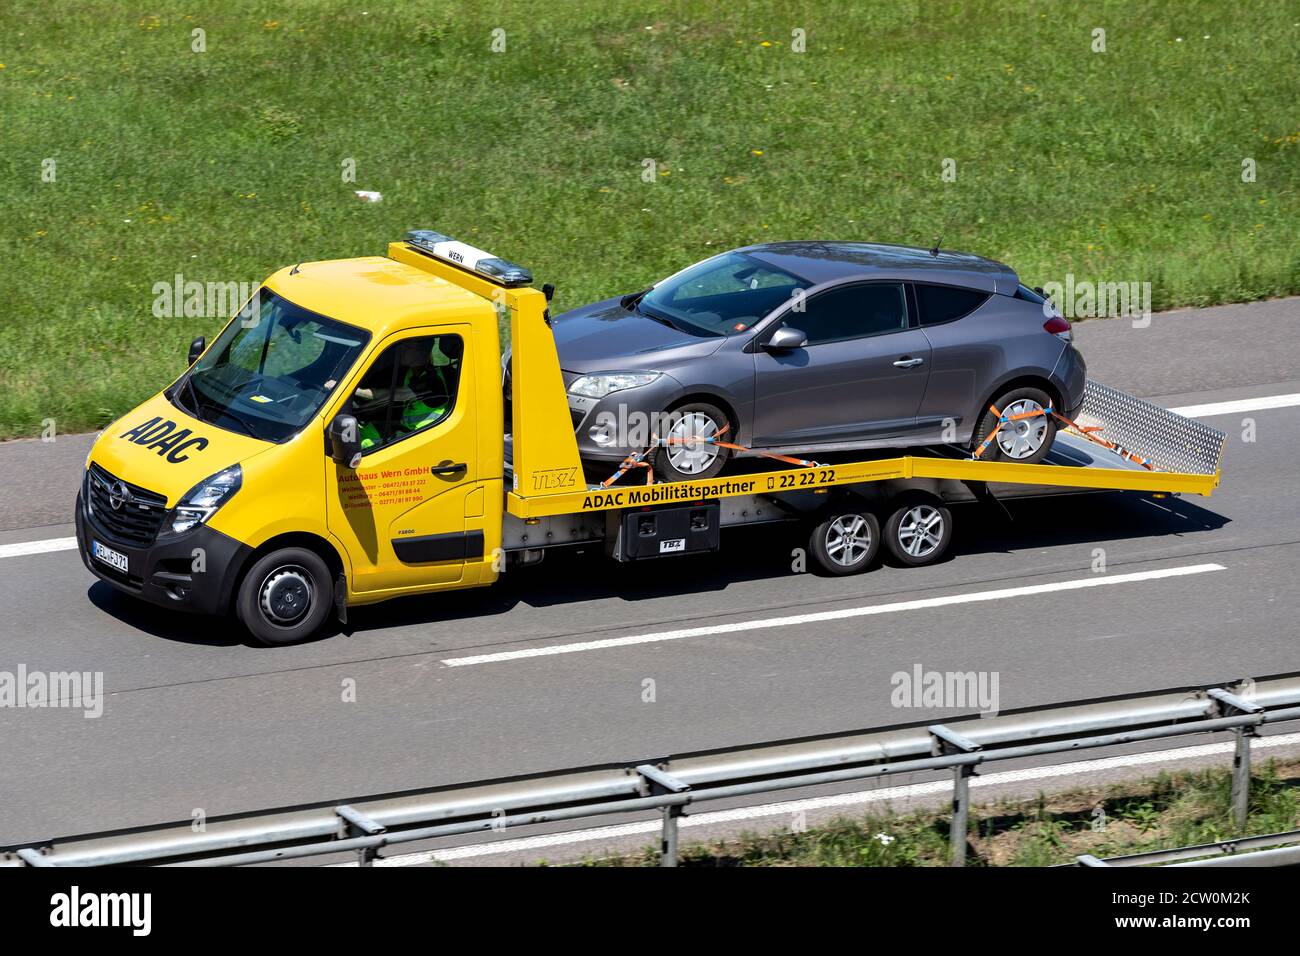 ADAC flatbed recovery vehicle on motorway. German ADAC it is the largest automobile club in Europe. Stock Photo